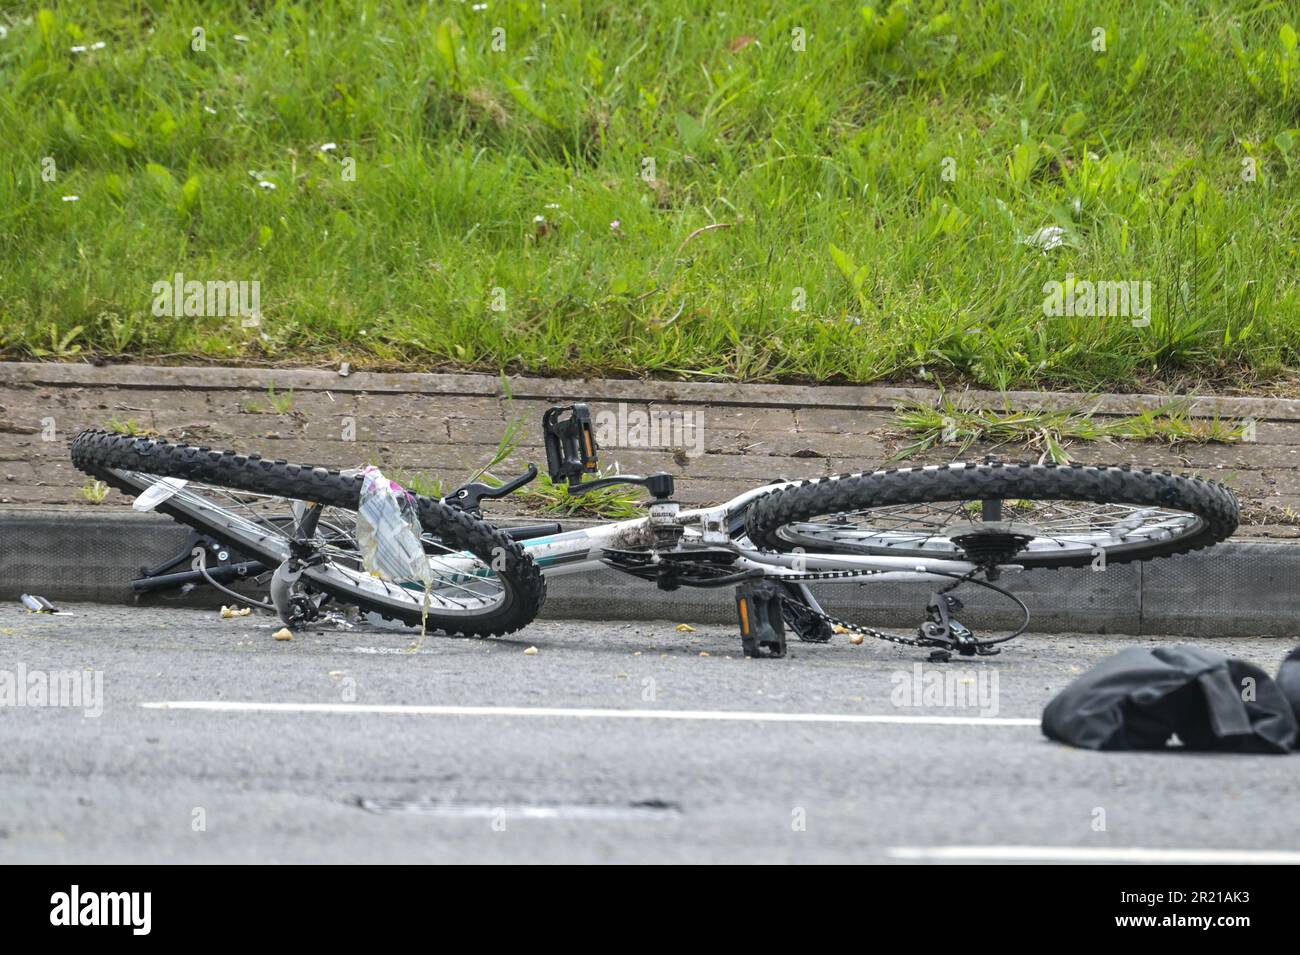 Belgrave Middleway, Birmingham, 16th May 2023 - A man has died after he was hit by a vehicle whilst crossing a major road through Birmingham city centre on Tuesday afternoon. Paramedics worked on the cyclist but he was declared dead at the scene. West Midlands Police closed both sides of Belgrave Middleway which is a 3-lane ring road through the city centre, causing traffic gridlock as officers investigate the mans death. West Midlands Police said at the time: 'We are currently dealing with a serious collision on Belgrave Middleway between the junctions of Horton Square and Haden Circus. 'The Stock Photo